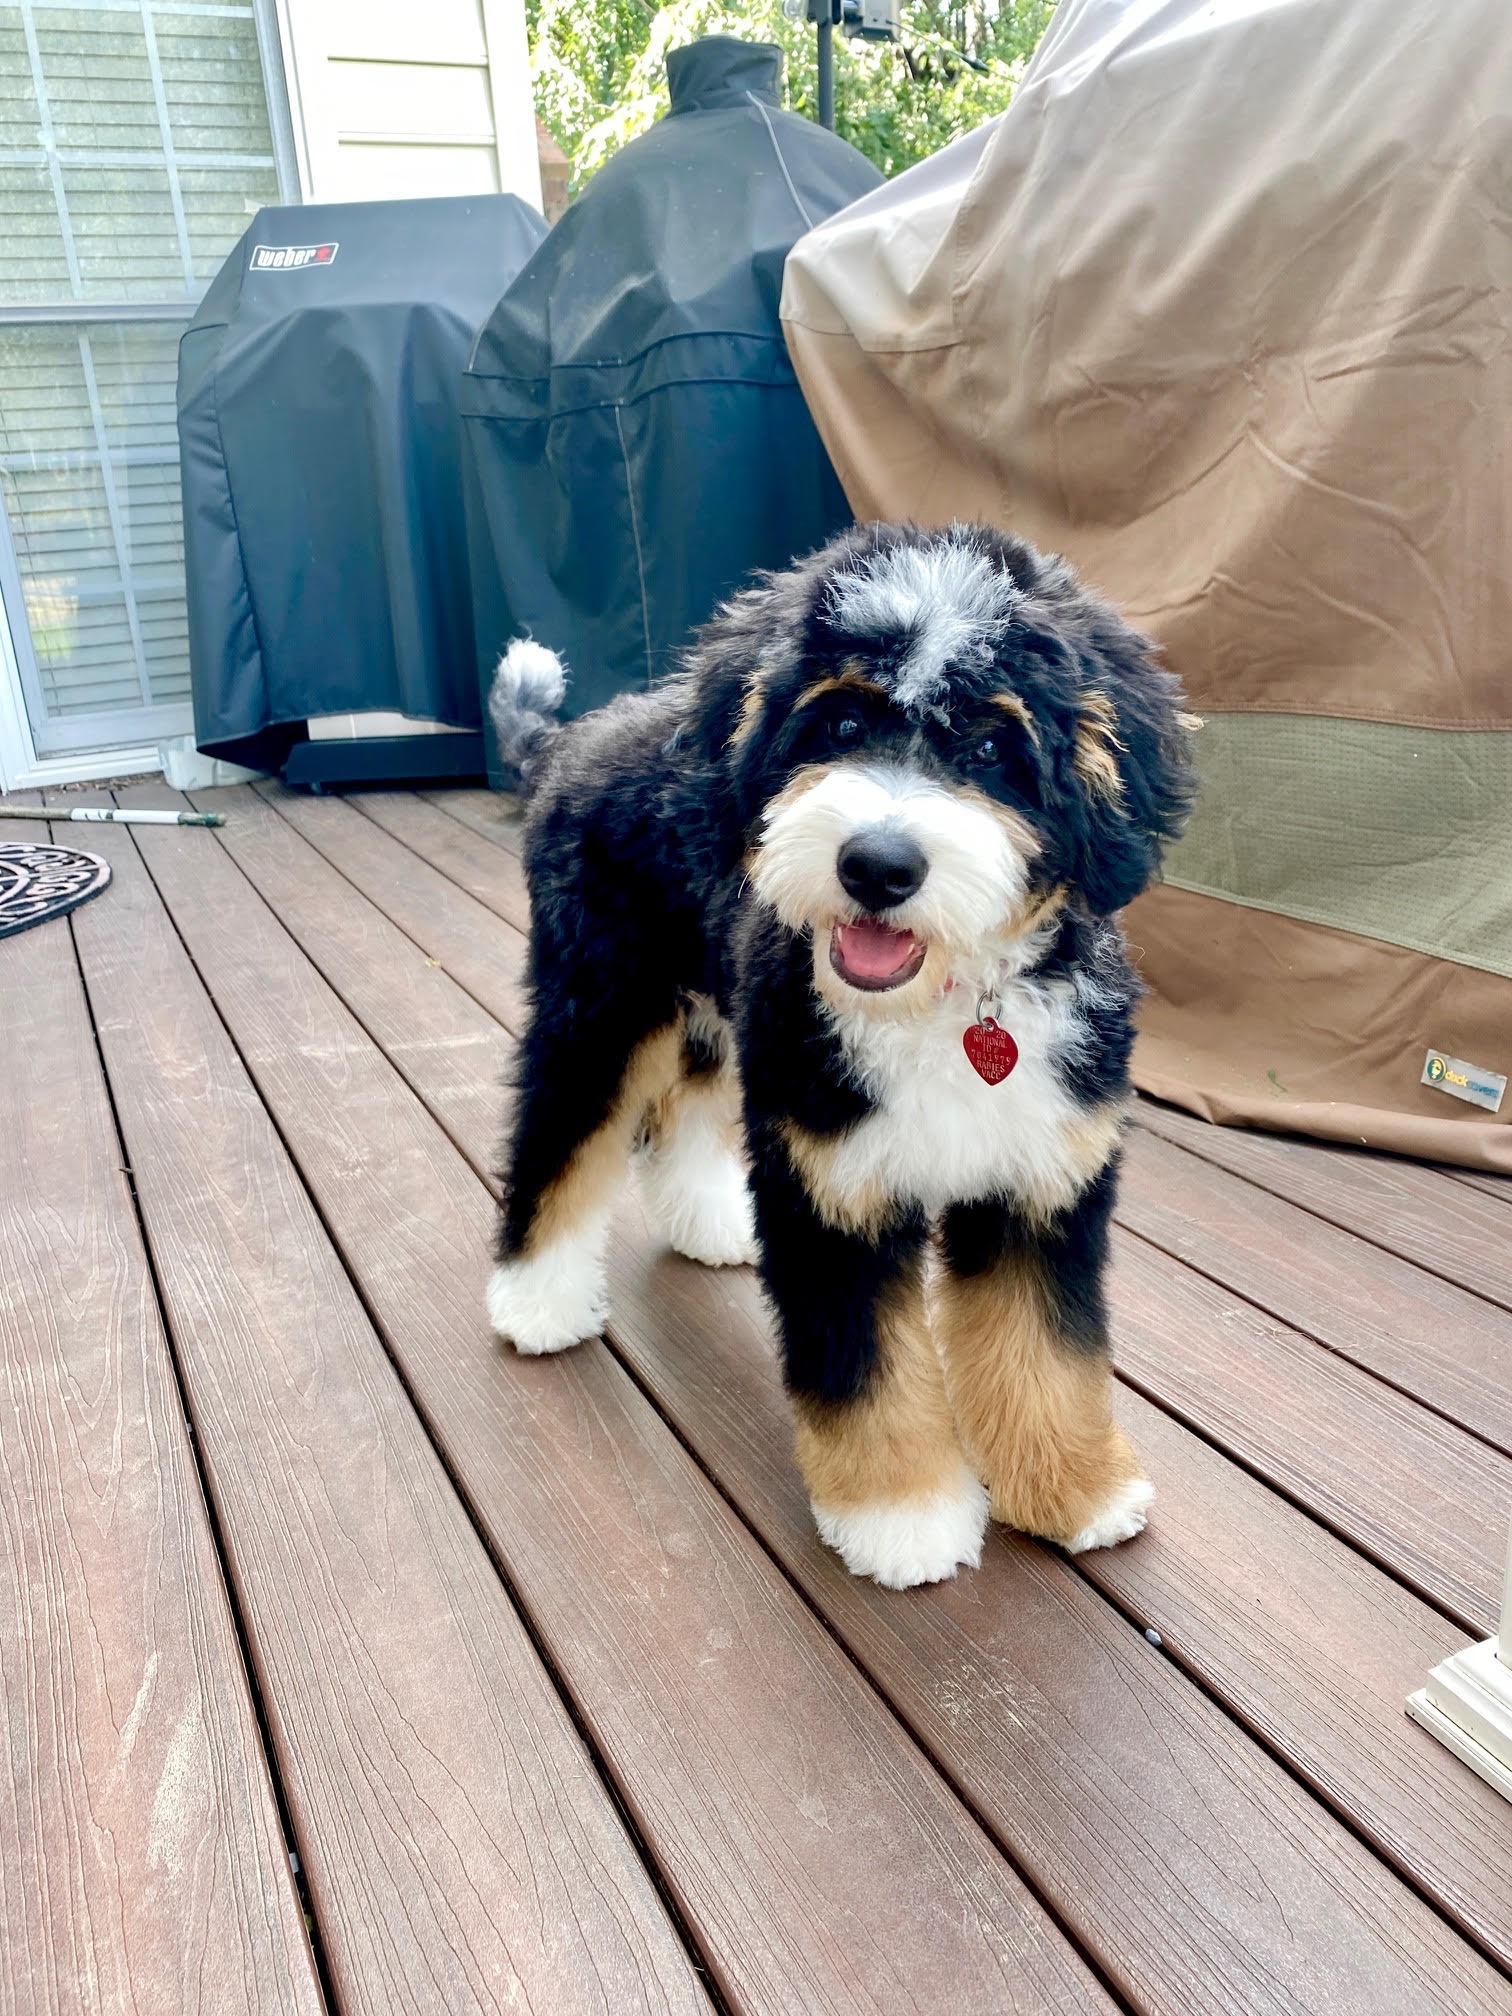 Adorable Bernedoodle puppies from Hoosier Canines enjoying their playtime in a spacious and safe outdoor area in Shipshewana, Indiana